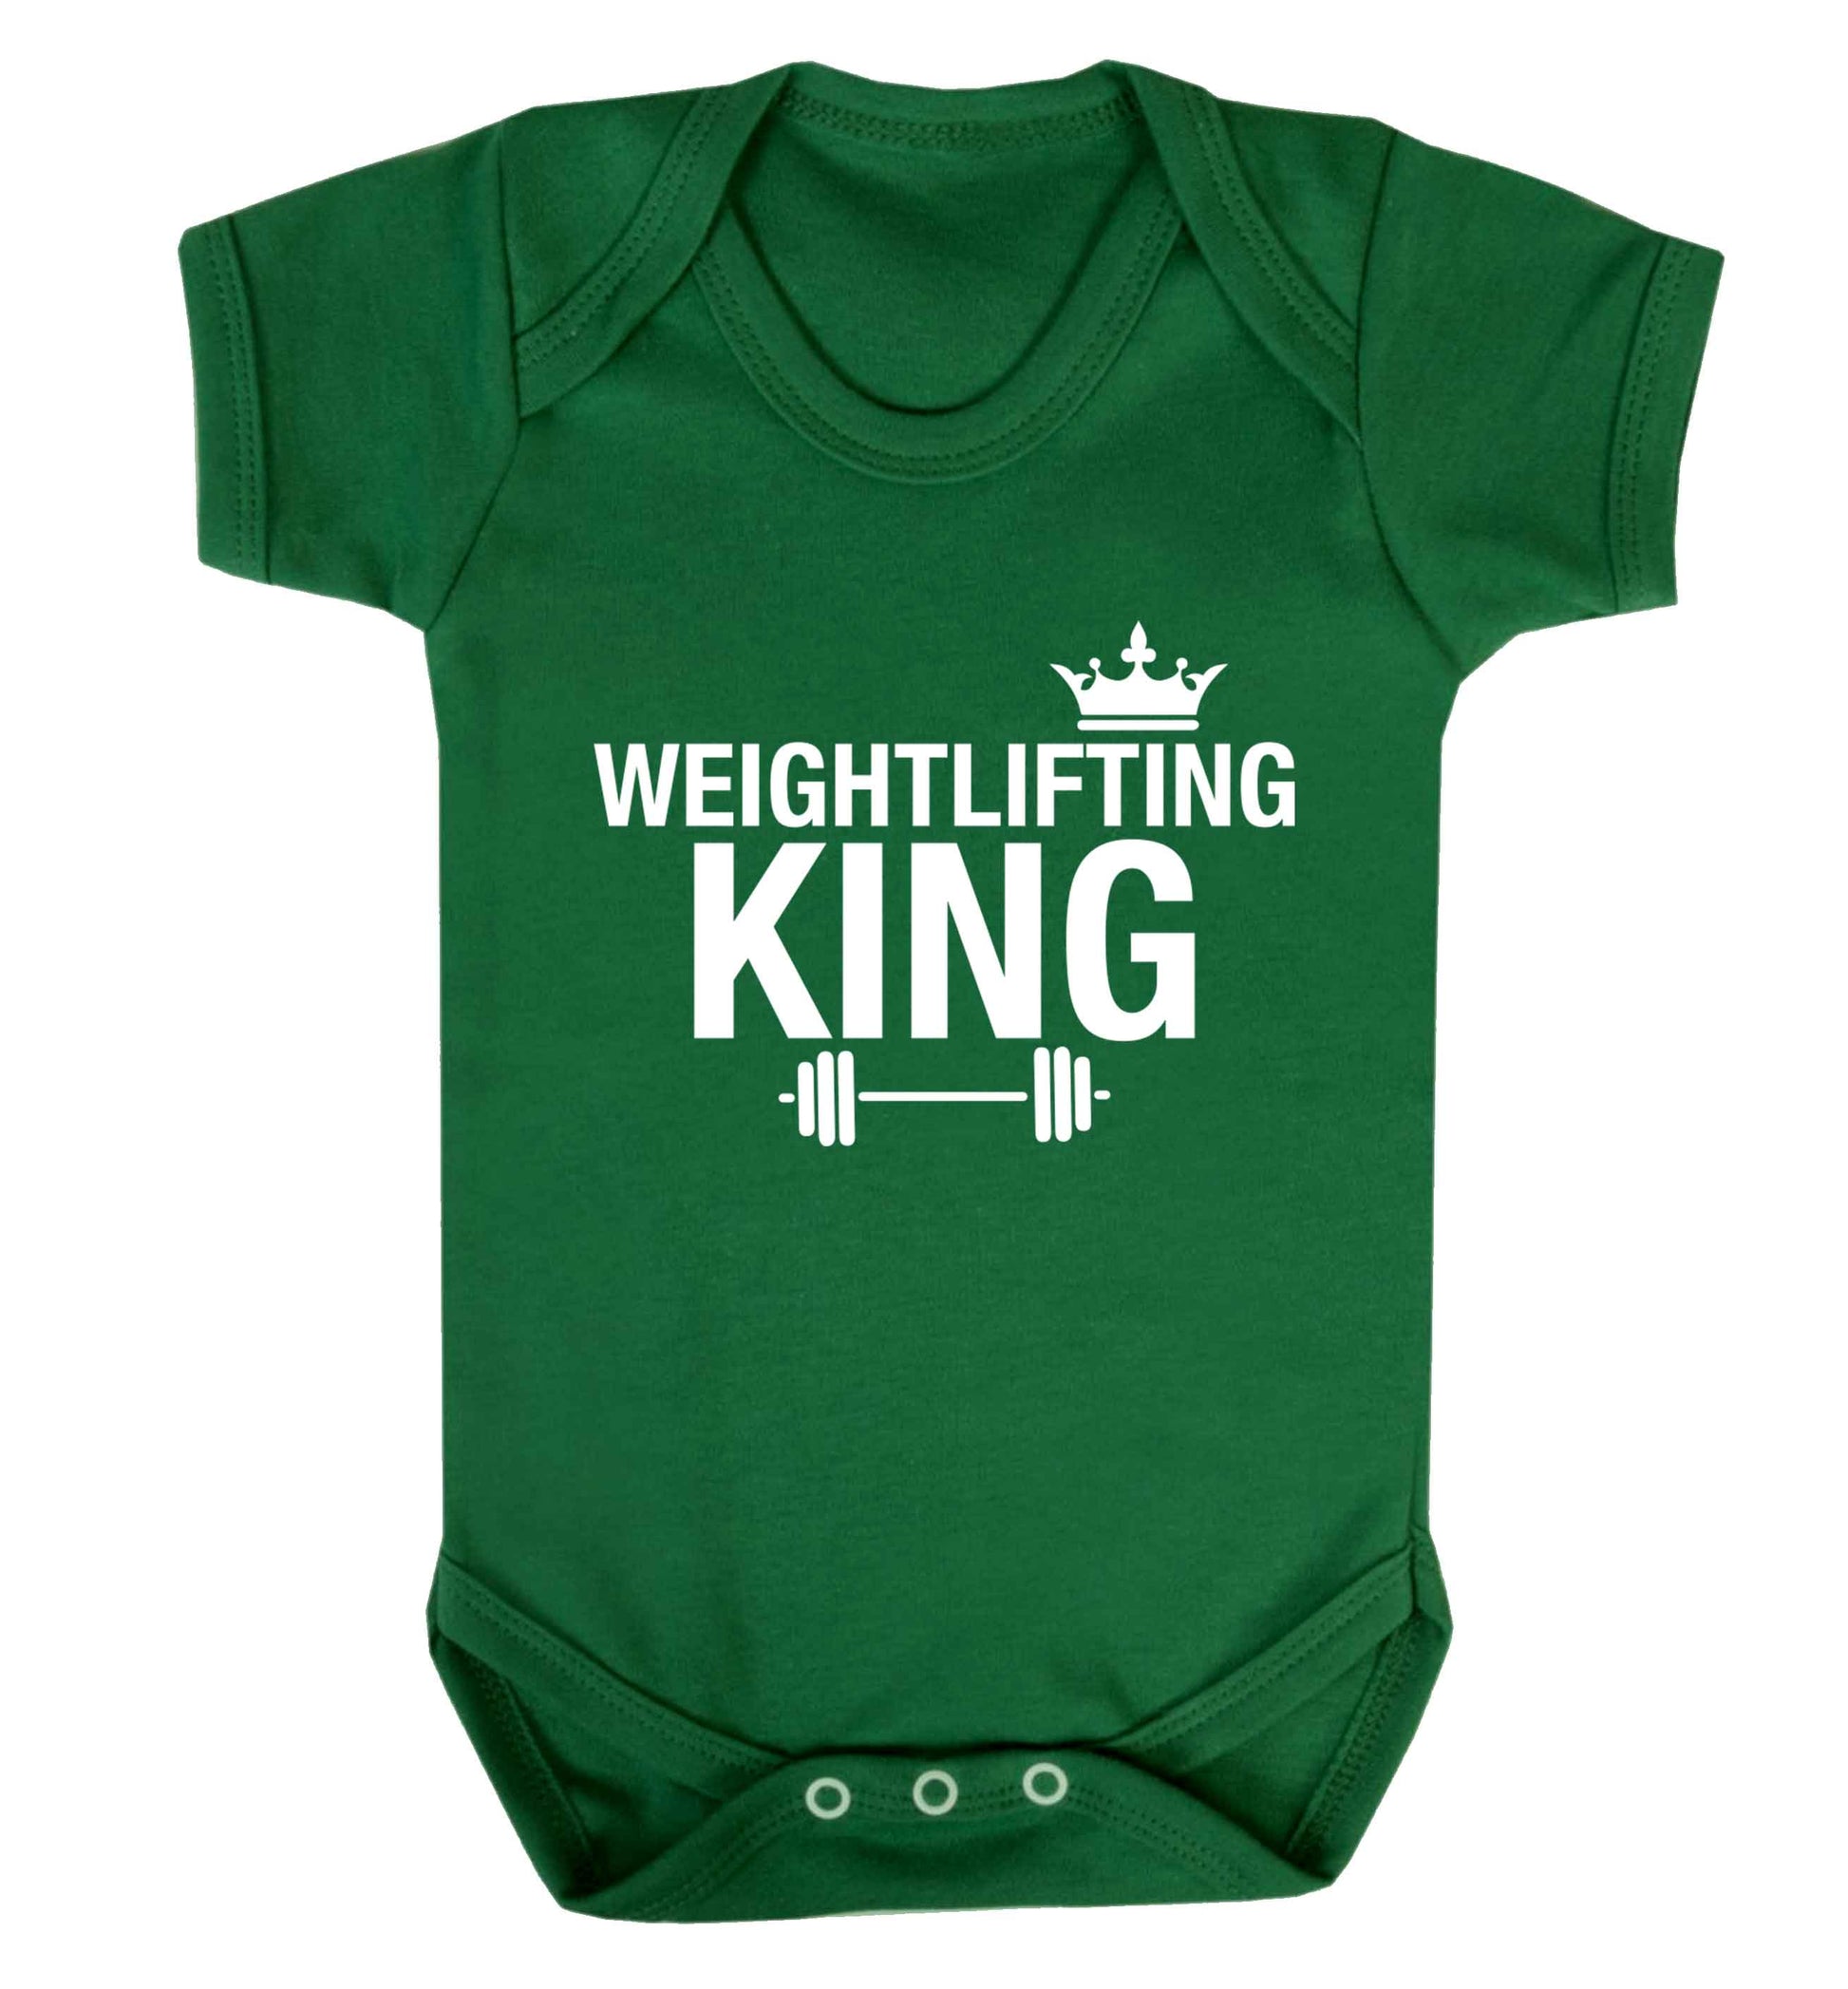 Weightlifting king Baby Vest green 18-24 months